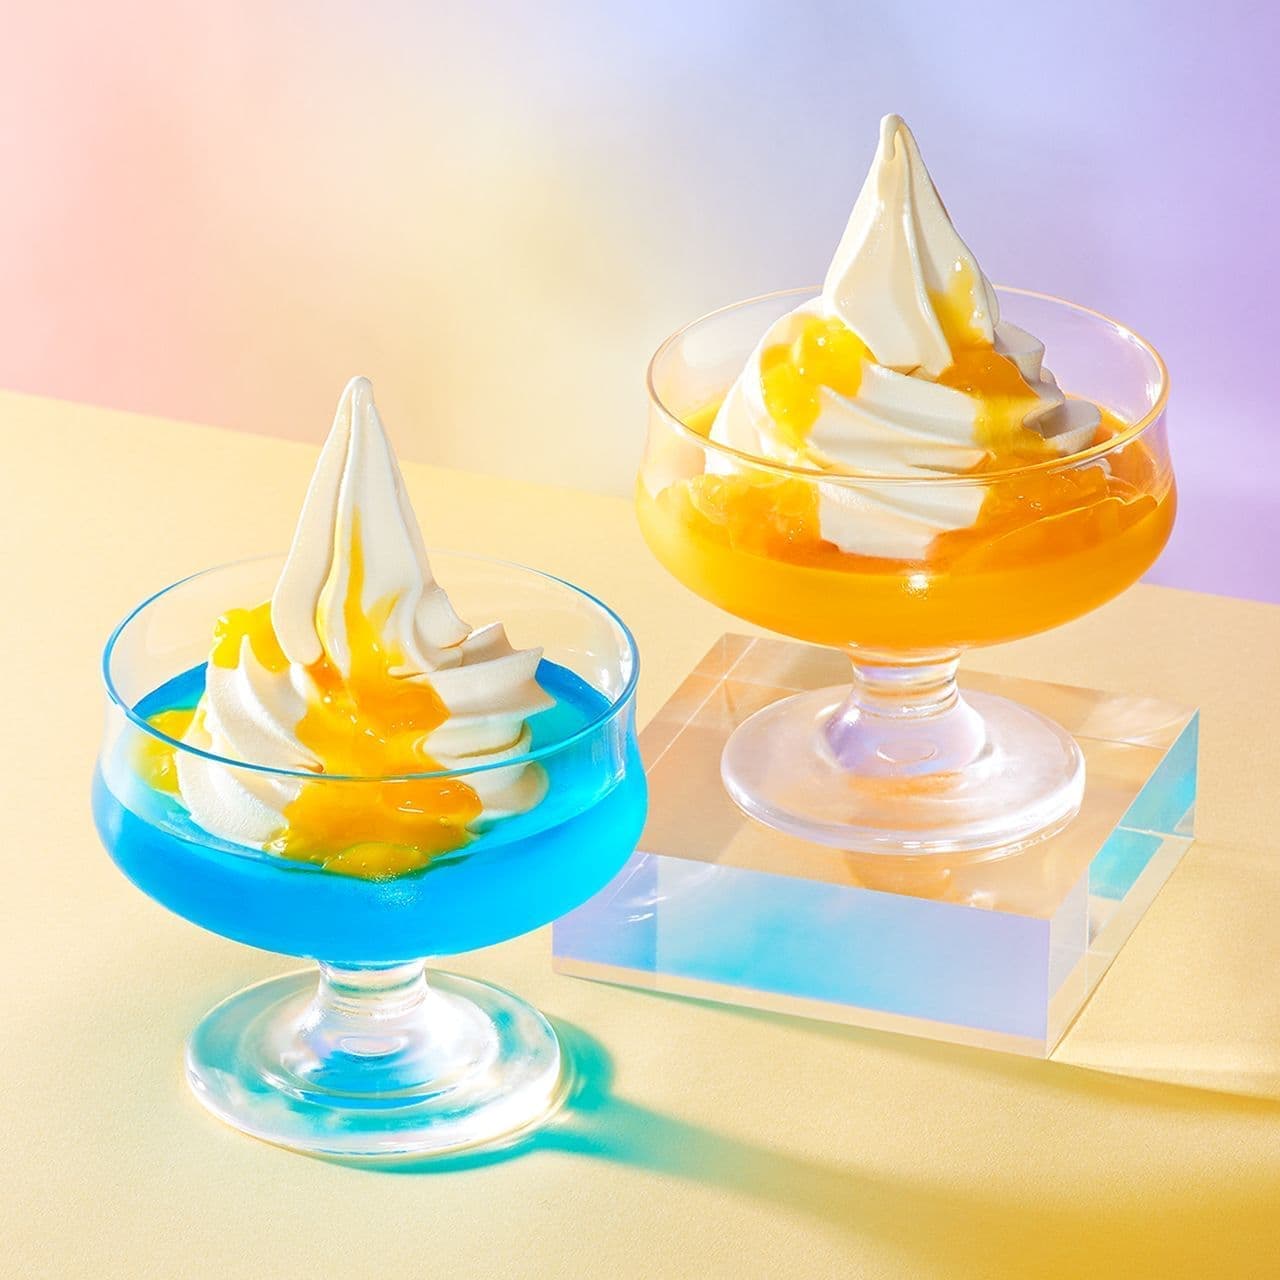 Cafe Veloce "Ramune-style tropical jelly" and "Thick mango jelly